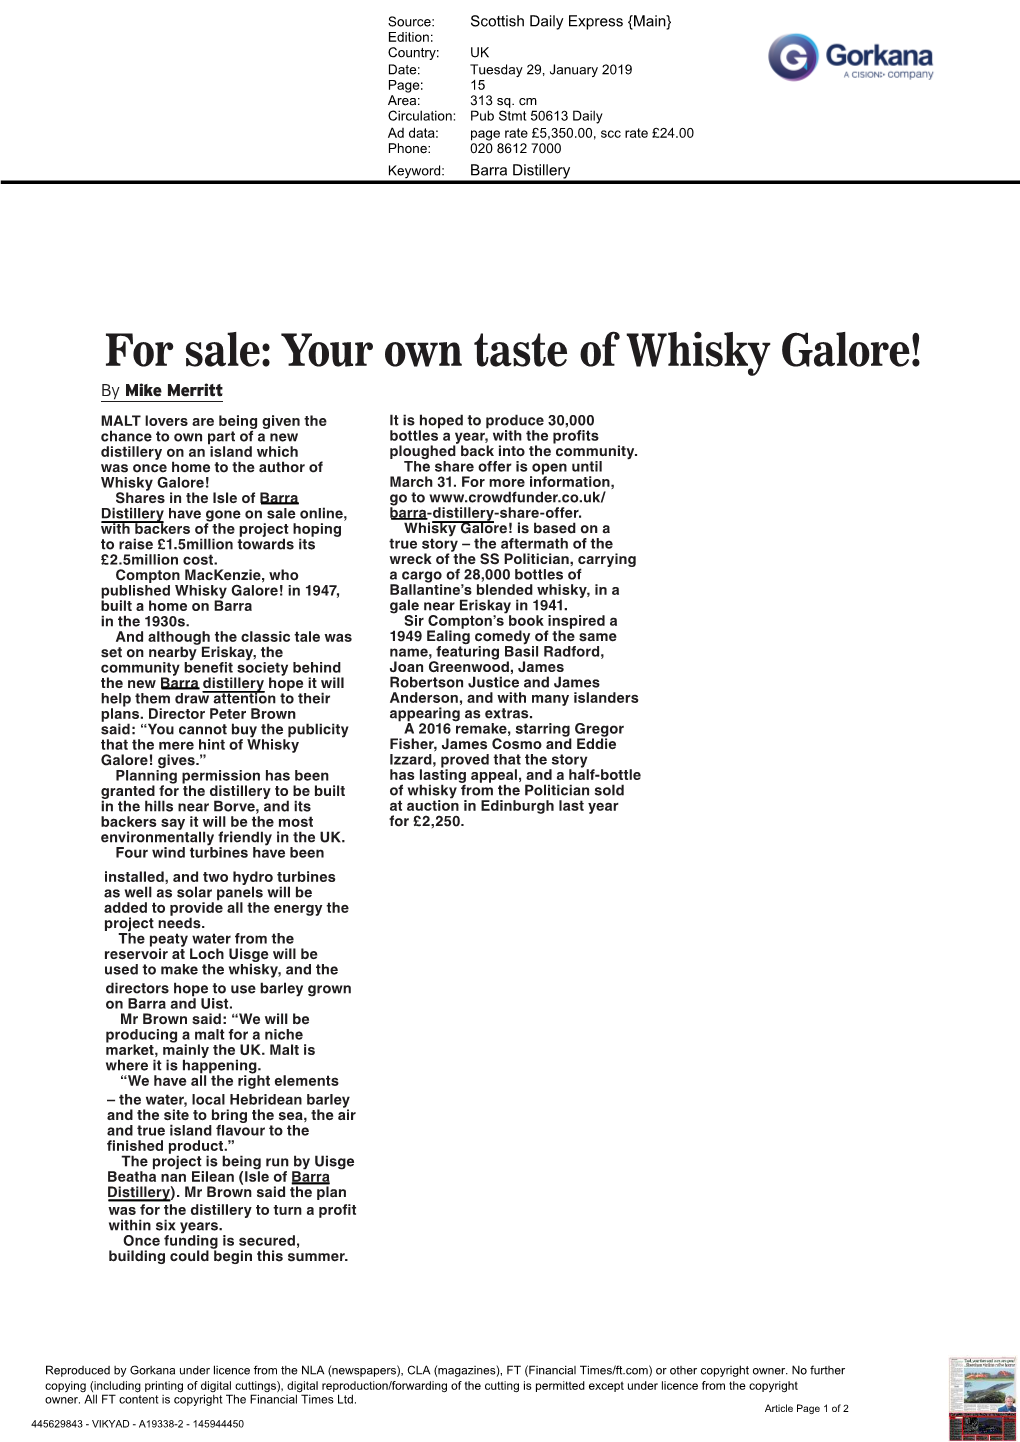 For Sale: Your Own Taste of Whisky Galore!